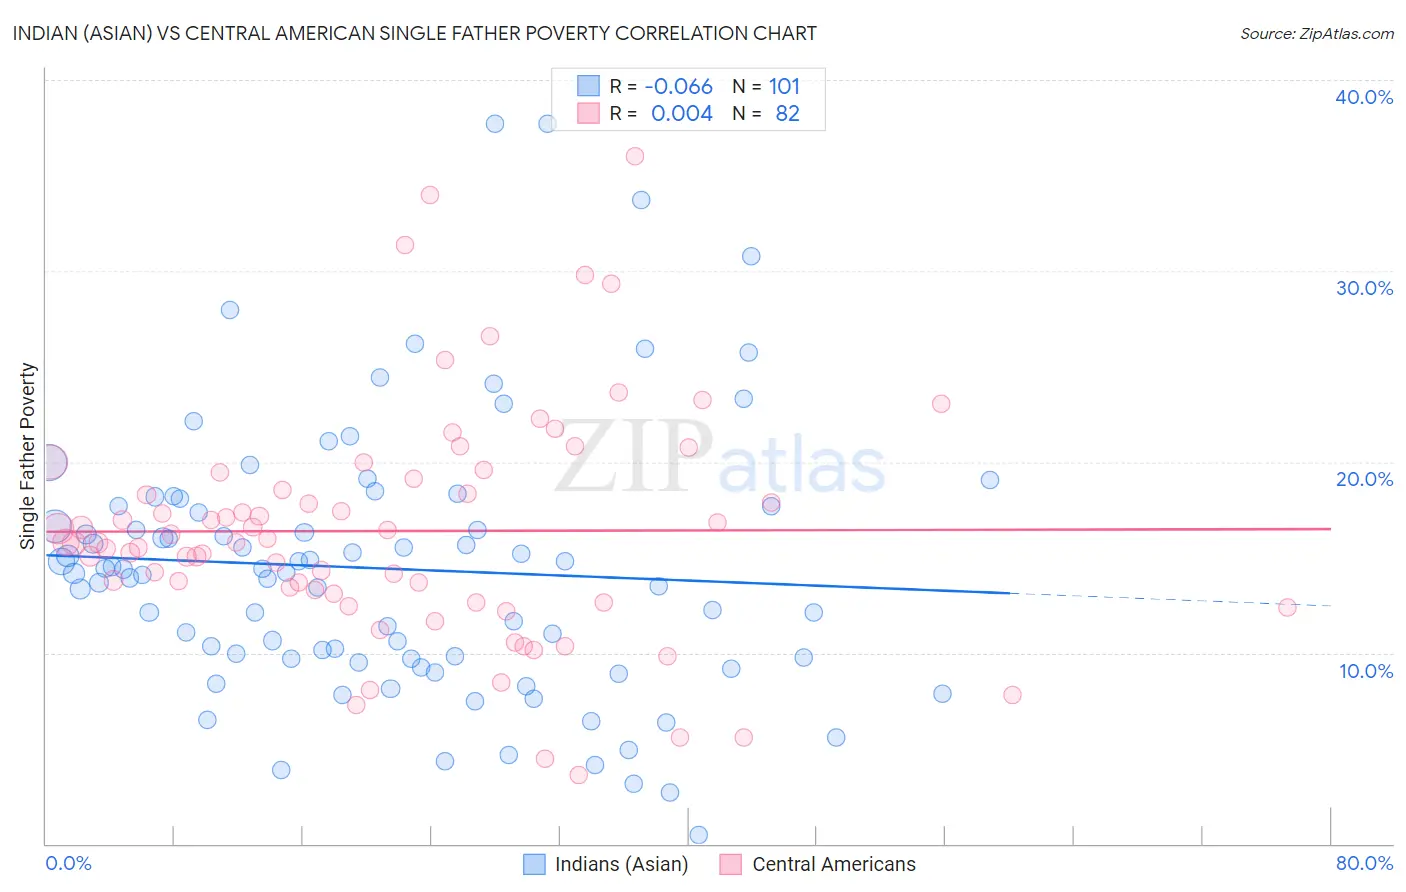 Indian (Asian) vs Central American Single Father Poverty